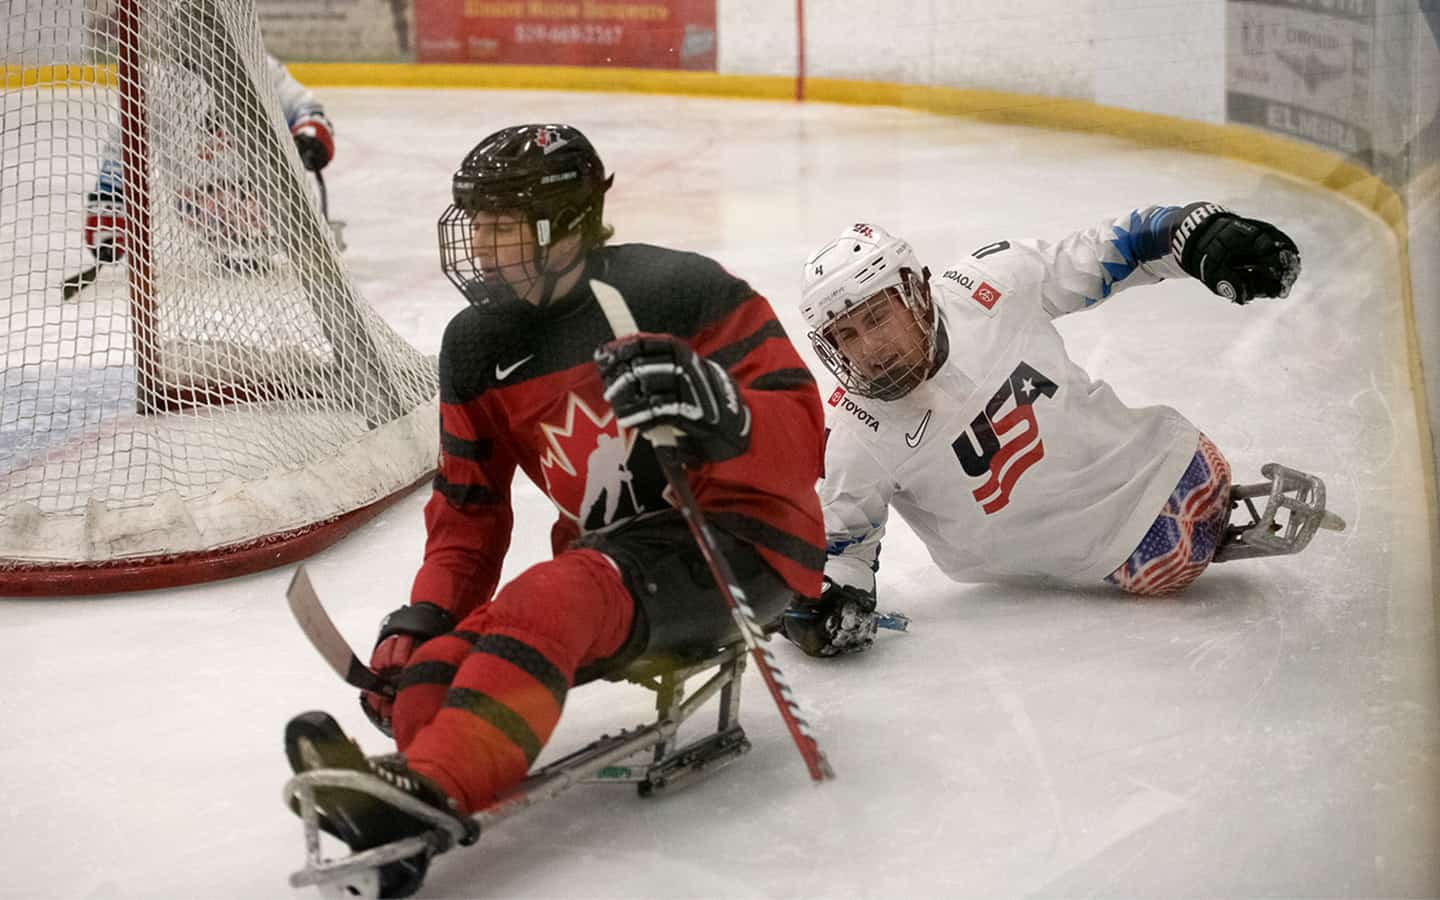                      U.S. edges out Canada in national para hockey battle                             
                     